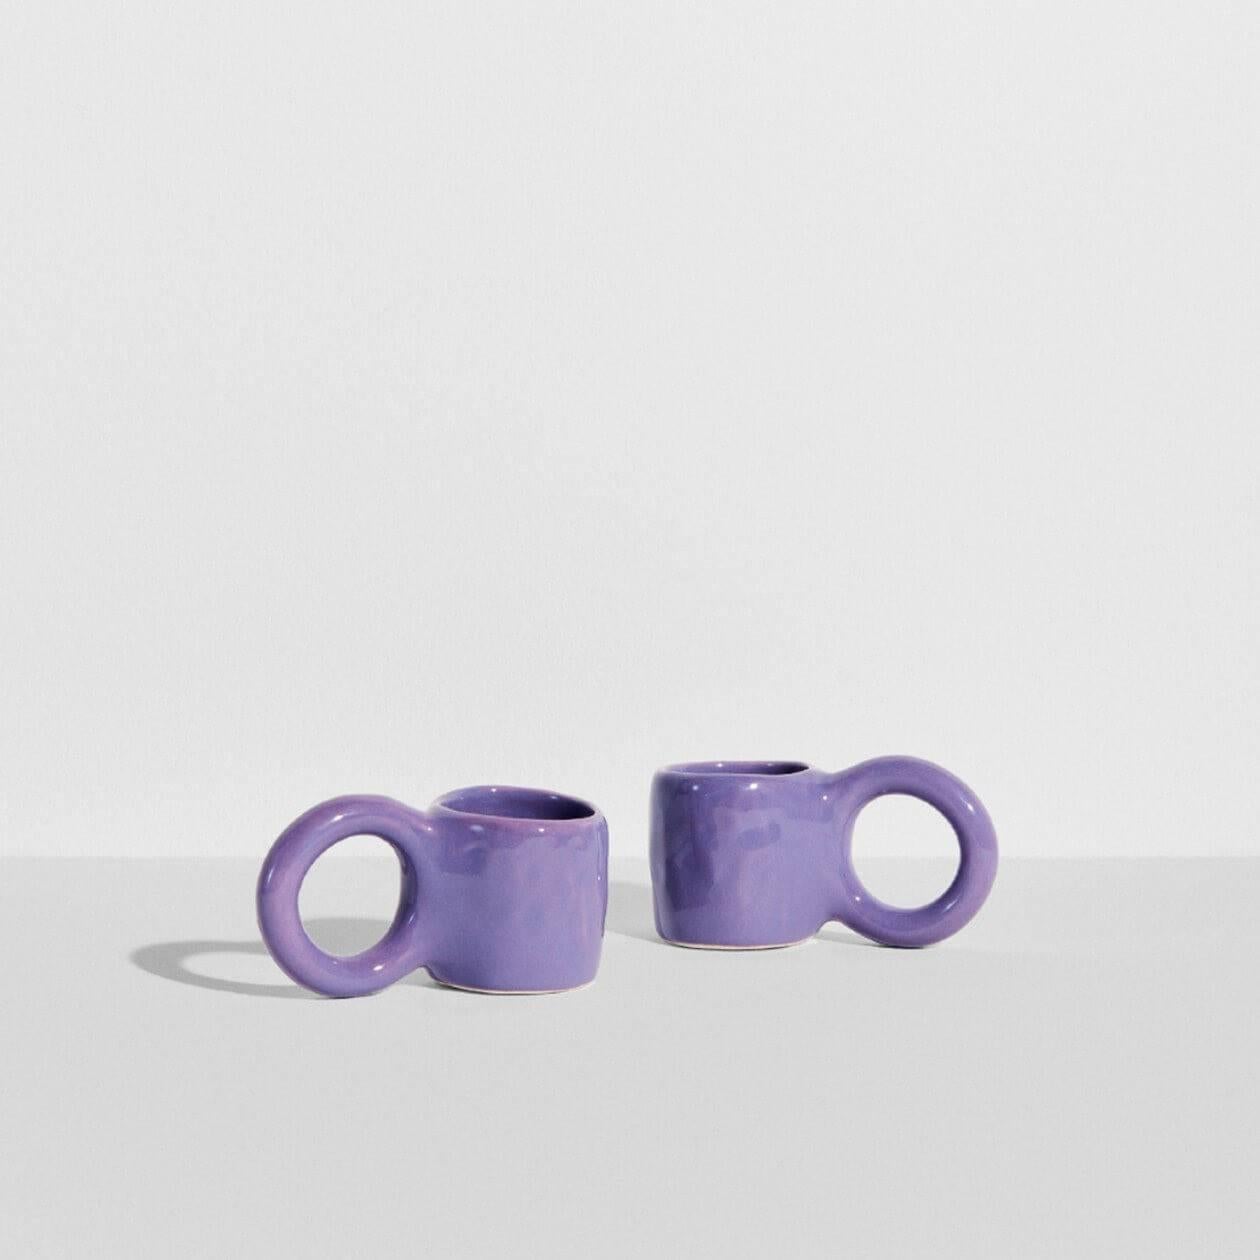 In creating the Donut collection, designer Pia Chevalier drew her inspiration from the world of baking. The ceramic artist designs her espresso like pastries, where the cup handles mimic doughnut pastry, and the enamel finish renders a sugar-glazed